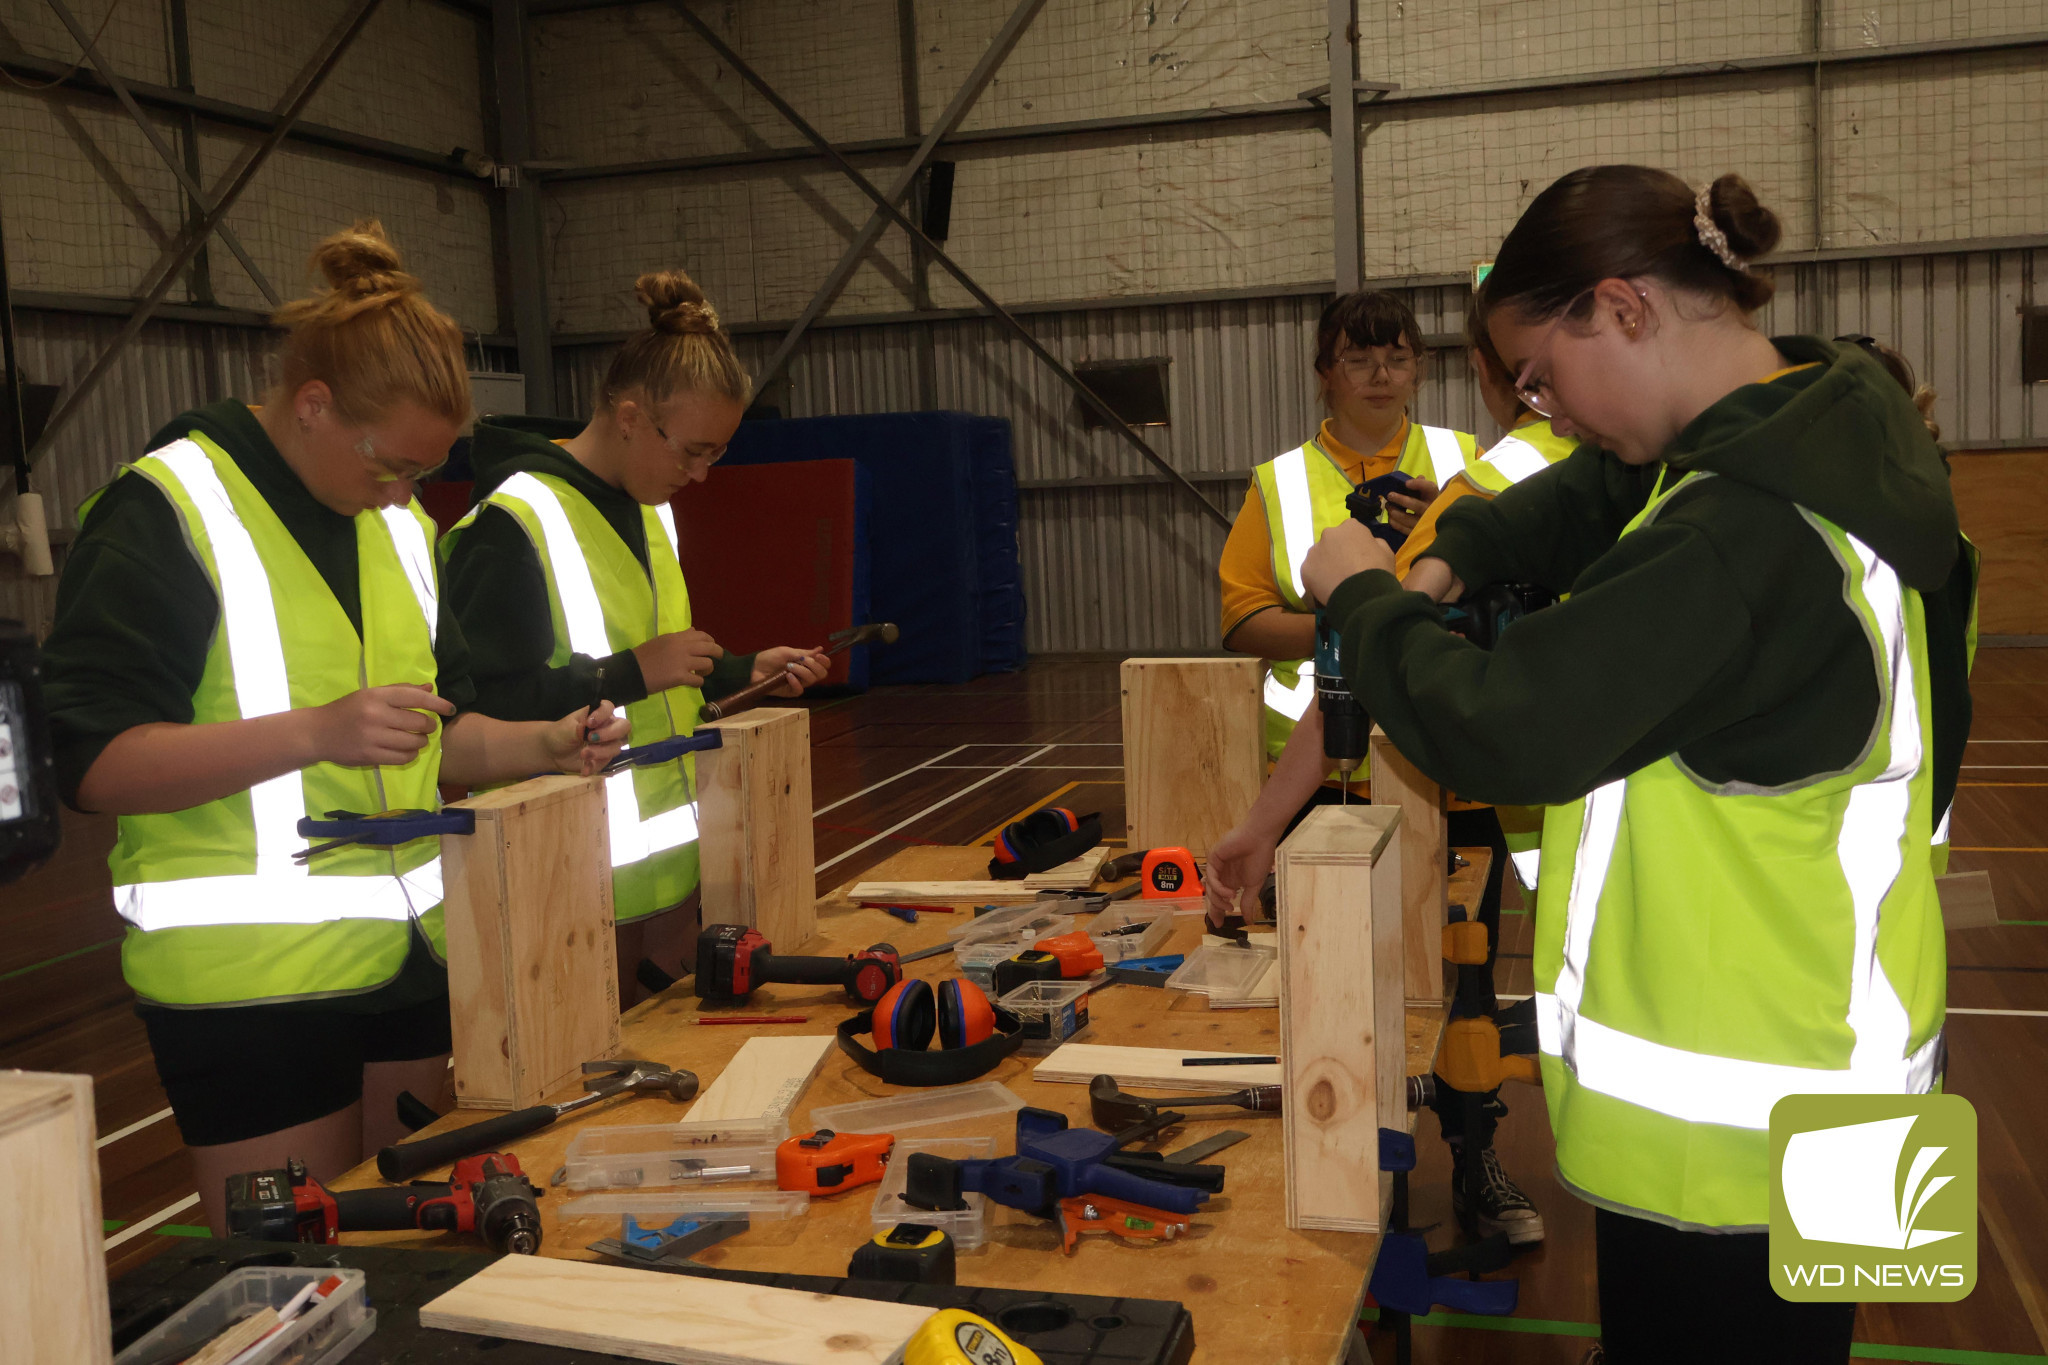 On the tools: Students at Derrinallum P-12 College got a taste of trades work last Friday when SALT visited the school.